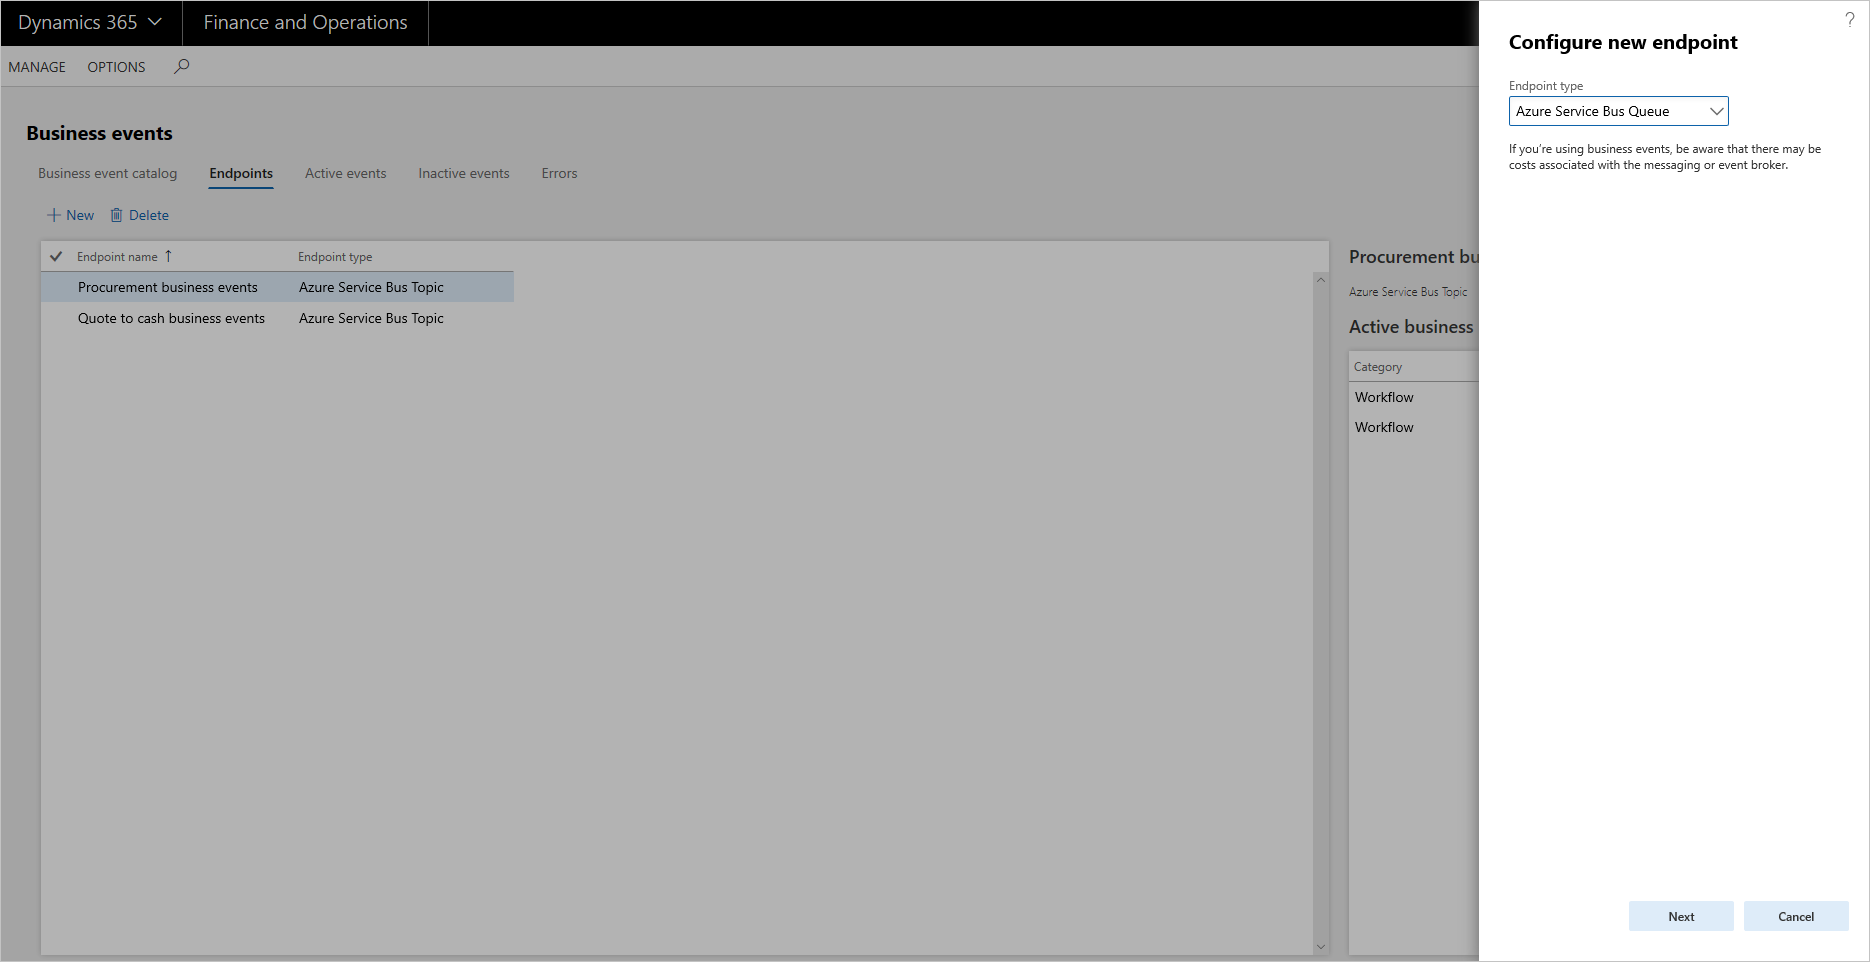 Selecting Azure Service Bus Queue as the endpoint type in the Configure new endpoint dialog box.